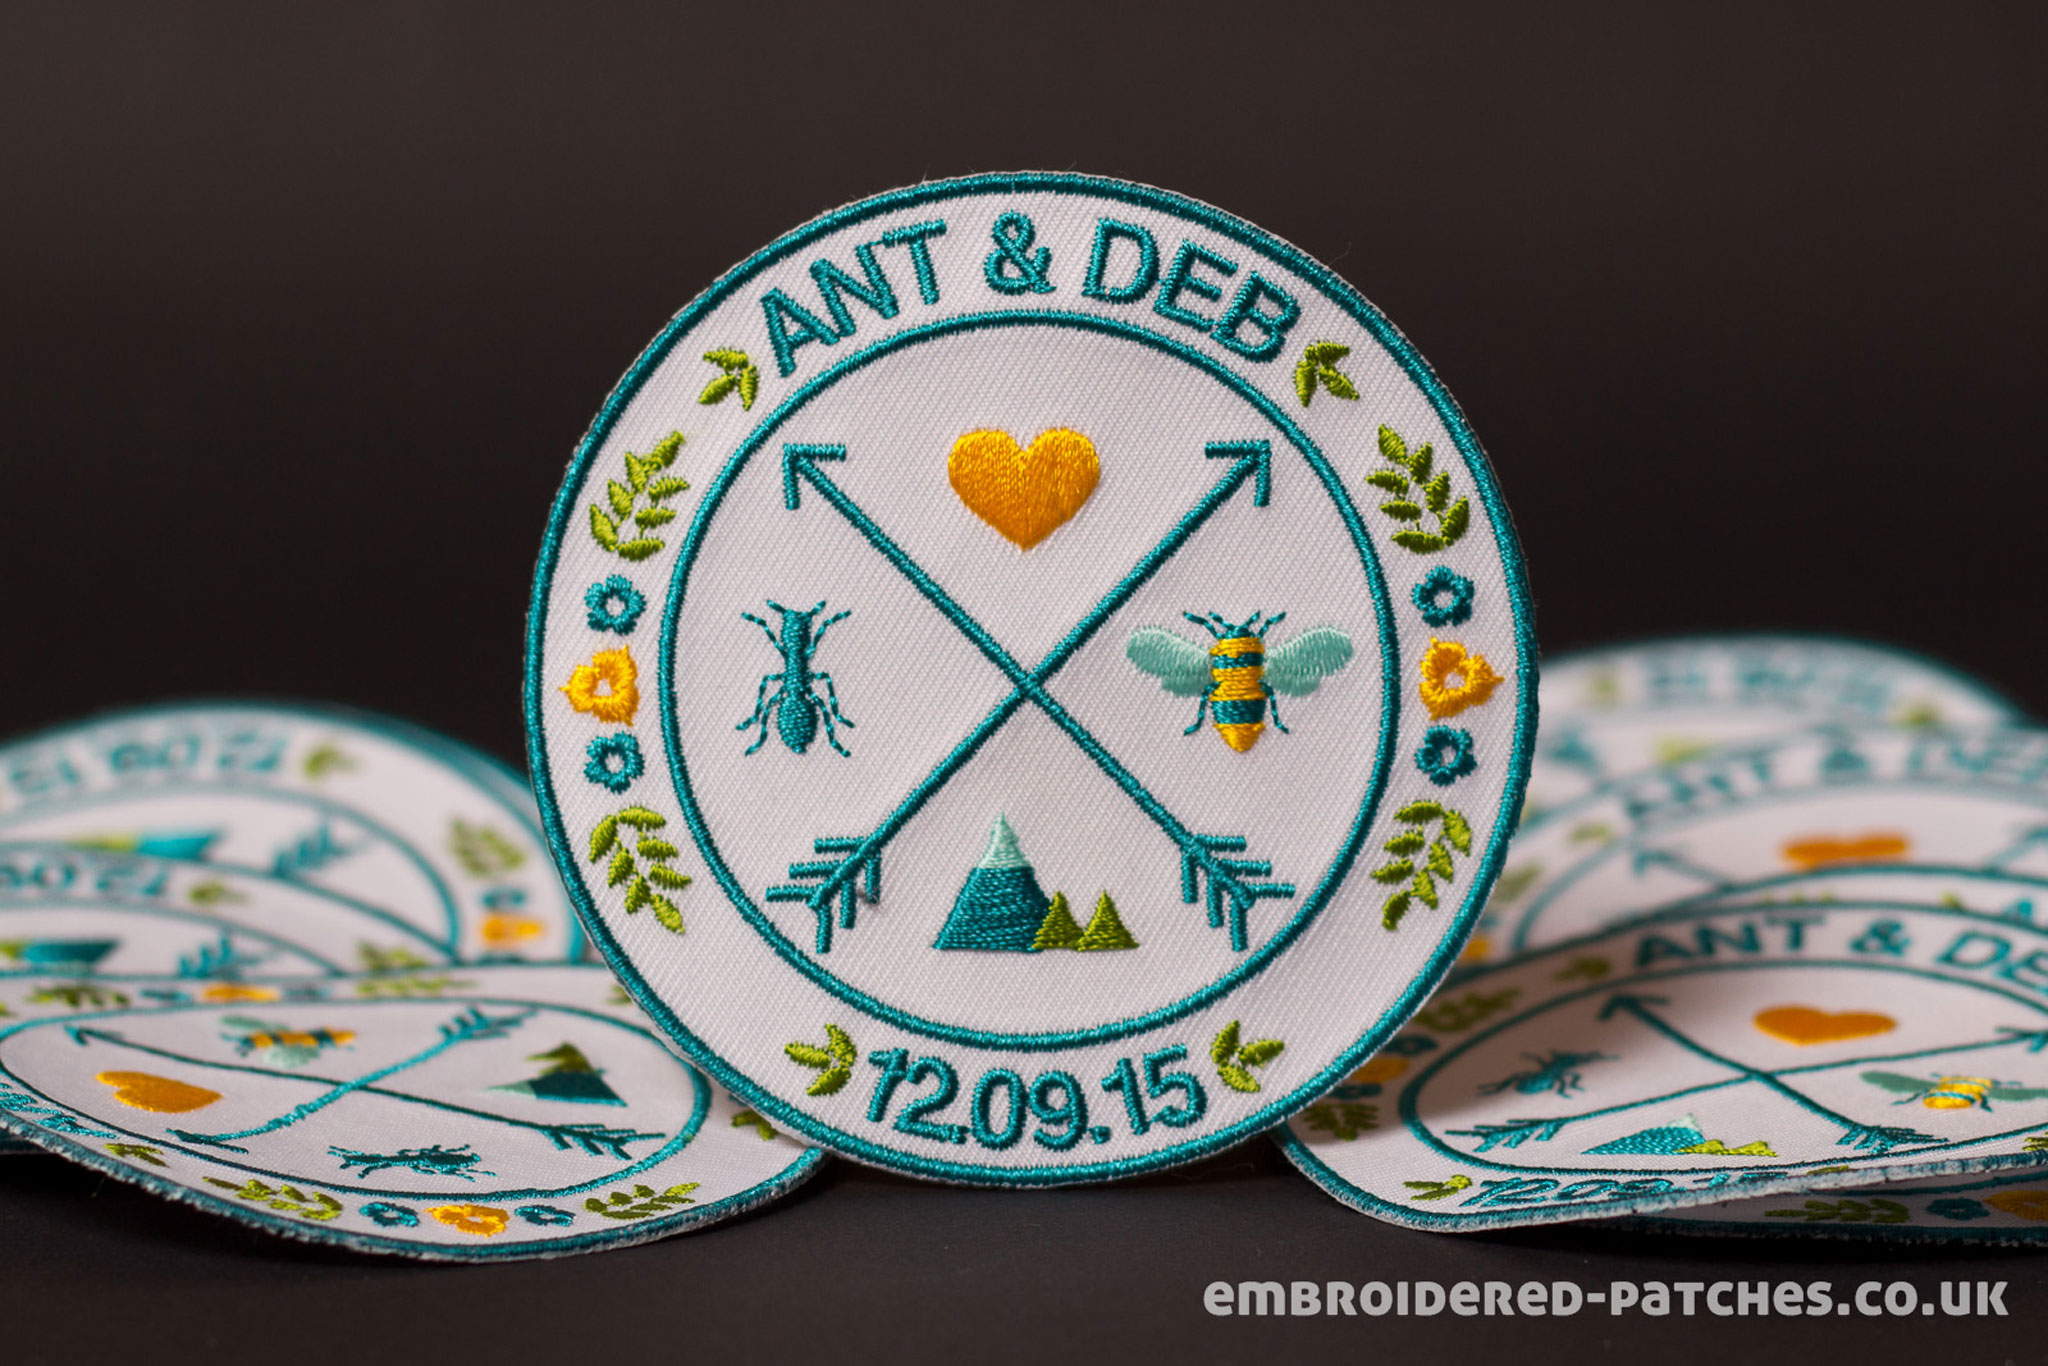 Embroidered wedding patches